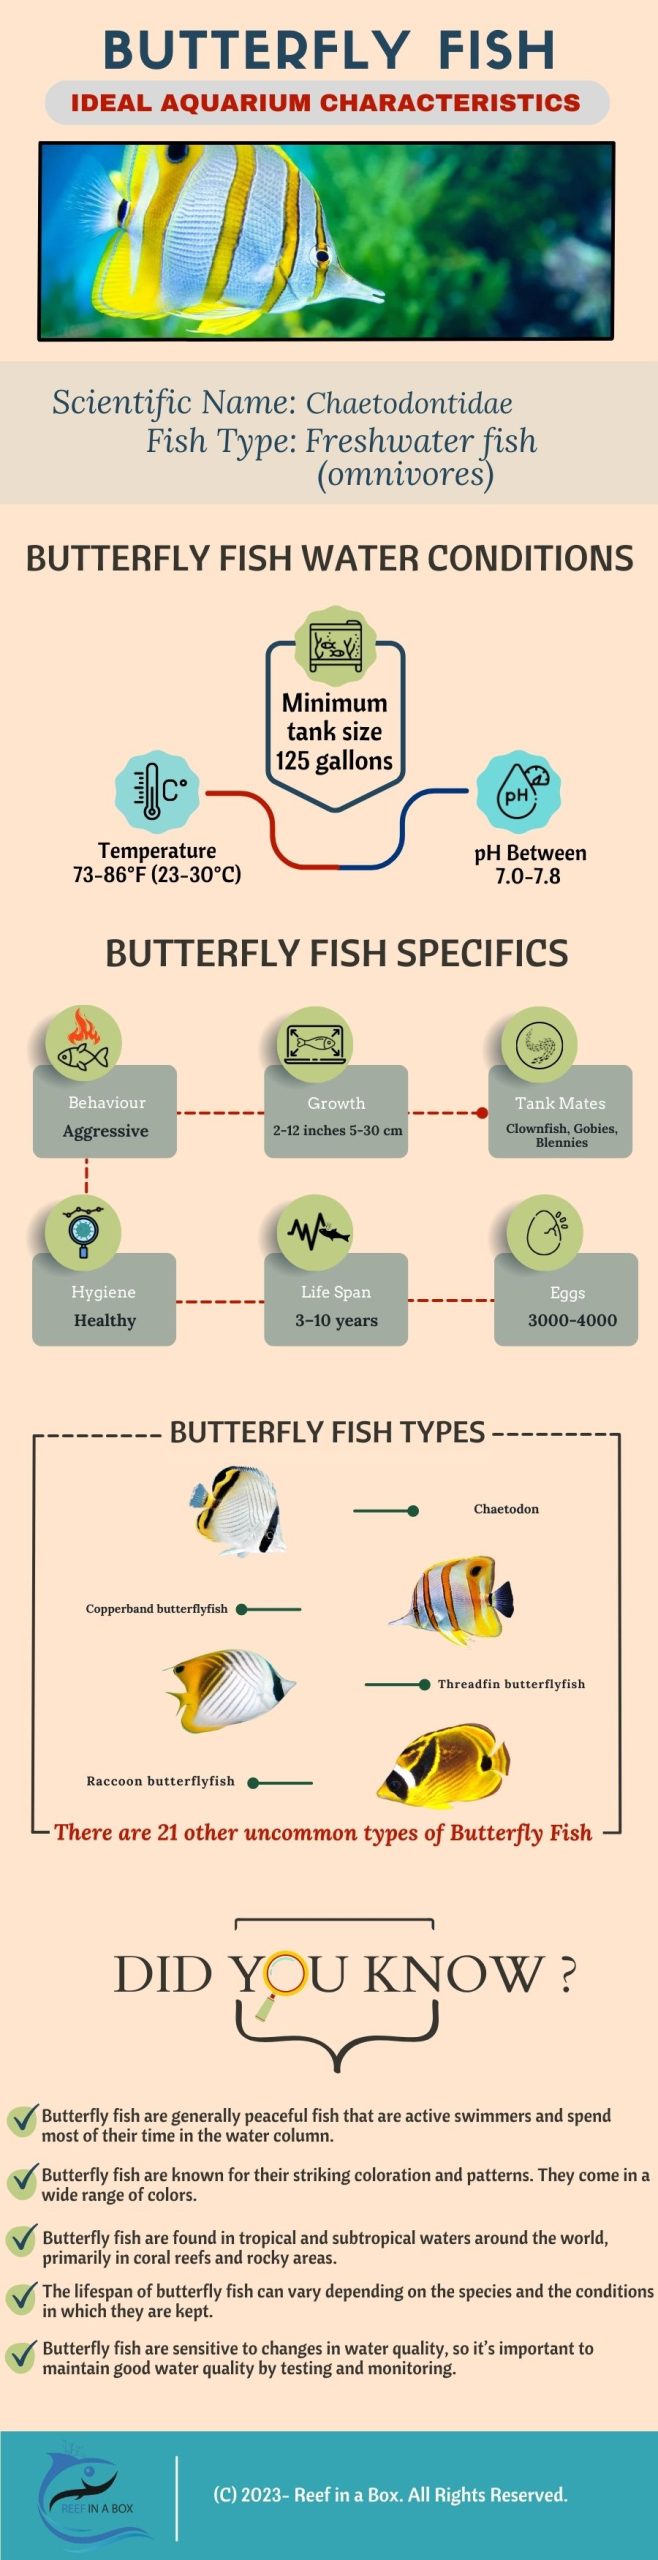 Butterfly Fish Infographic